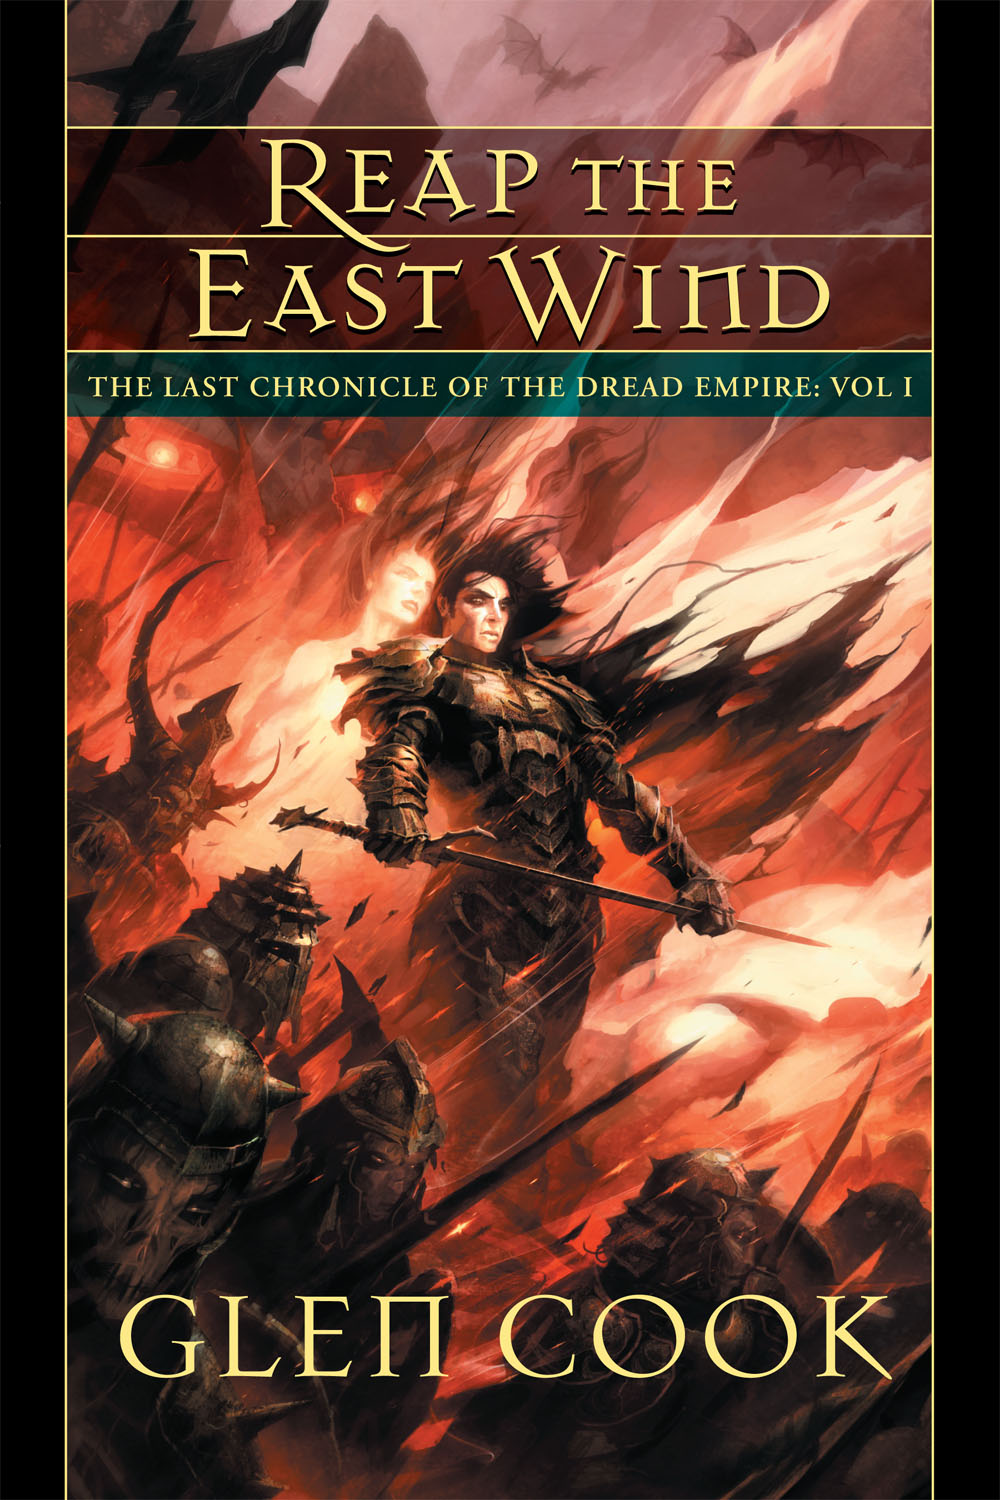 Reap the east wind